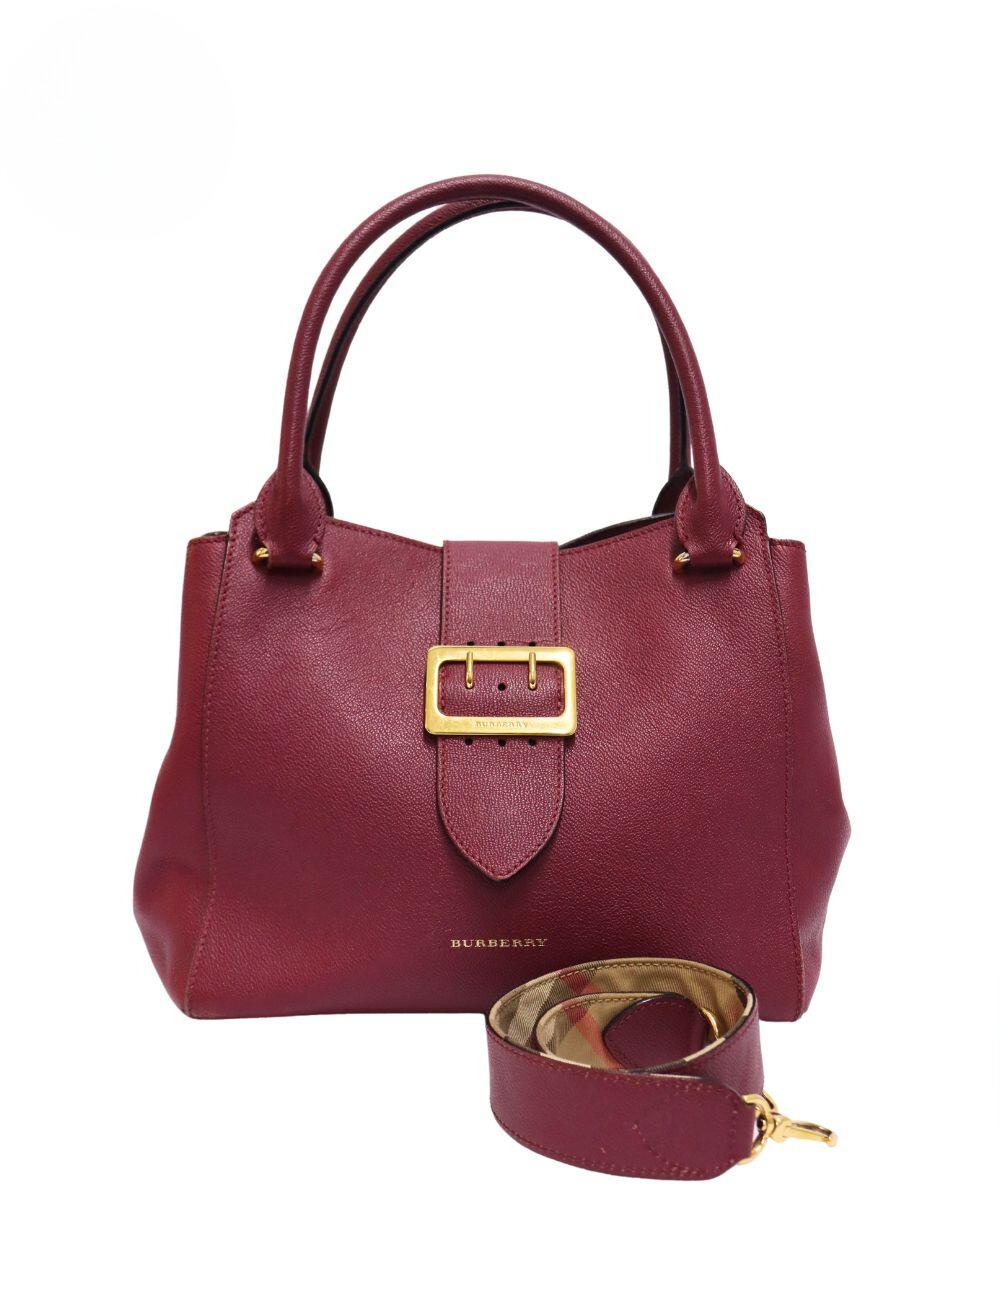 Burberry Medium Maroon Buckle Tote, Features Large Gold Buckle, Magnetic Closure, Removable Strap and Three Interior Pockets.

Material: Leather
Hardware: Gold
Height: 29cm
Width: 29.5cm
Depth: 9.5cm
Handle Drop: 18cm
Overall condition: